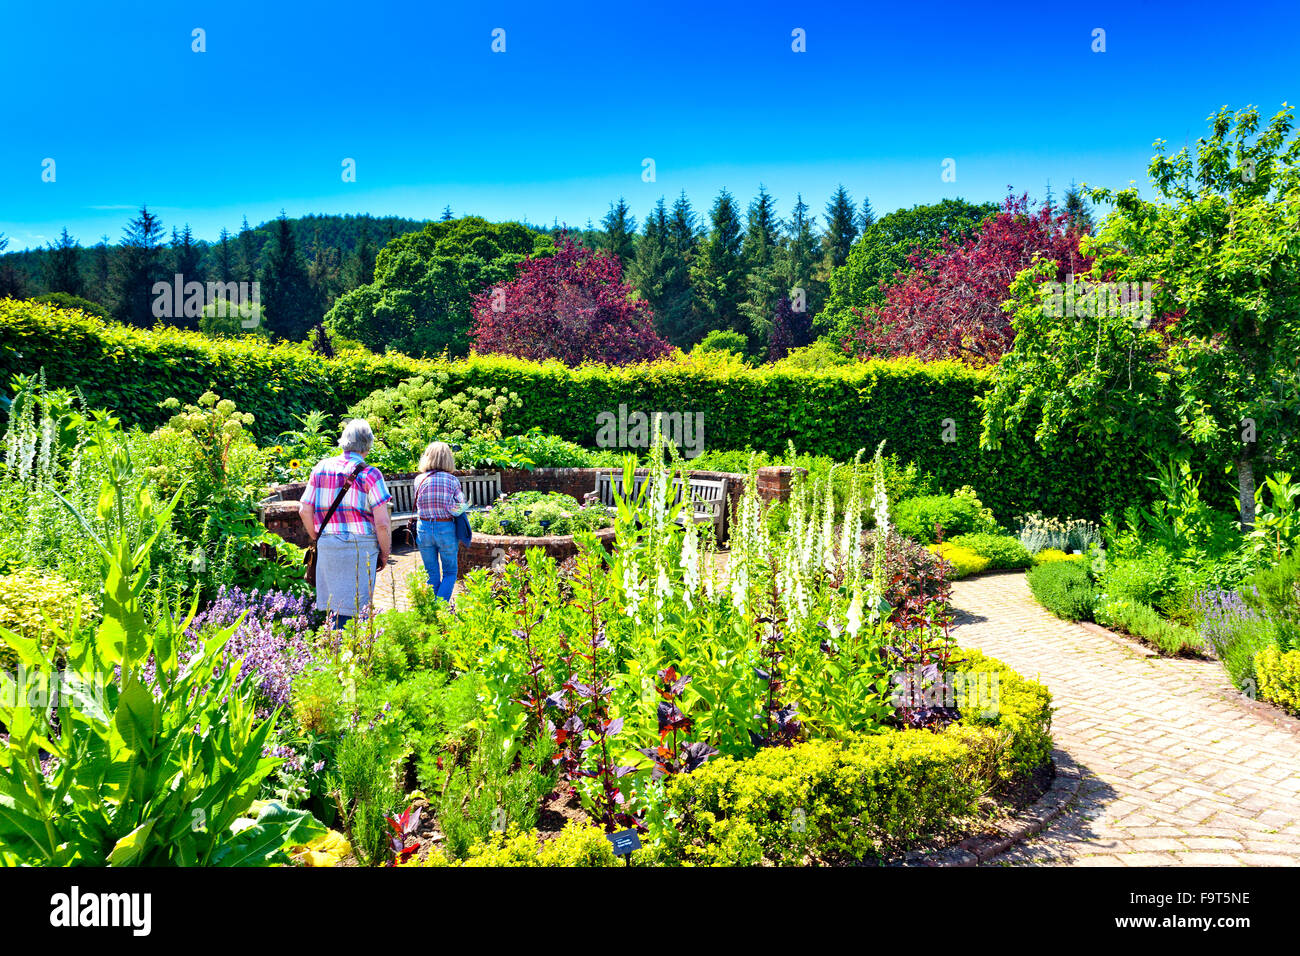 The colourful Potager Garden (a combined flower and vegetable garden) at RHS Rosemoor, North Devon, England, UK Stock Photo